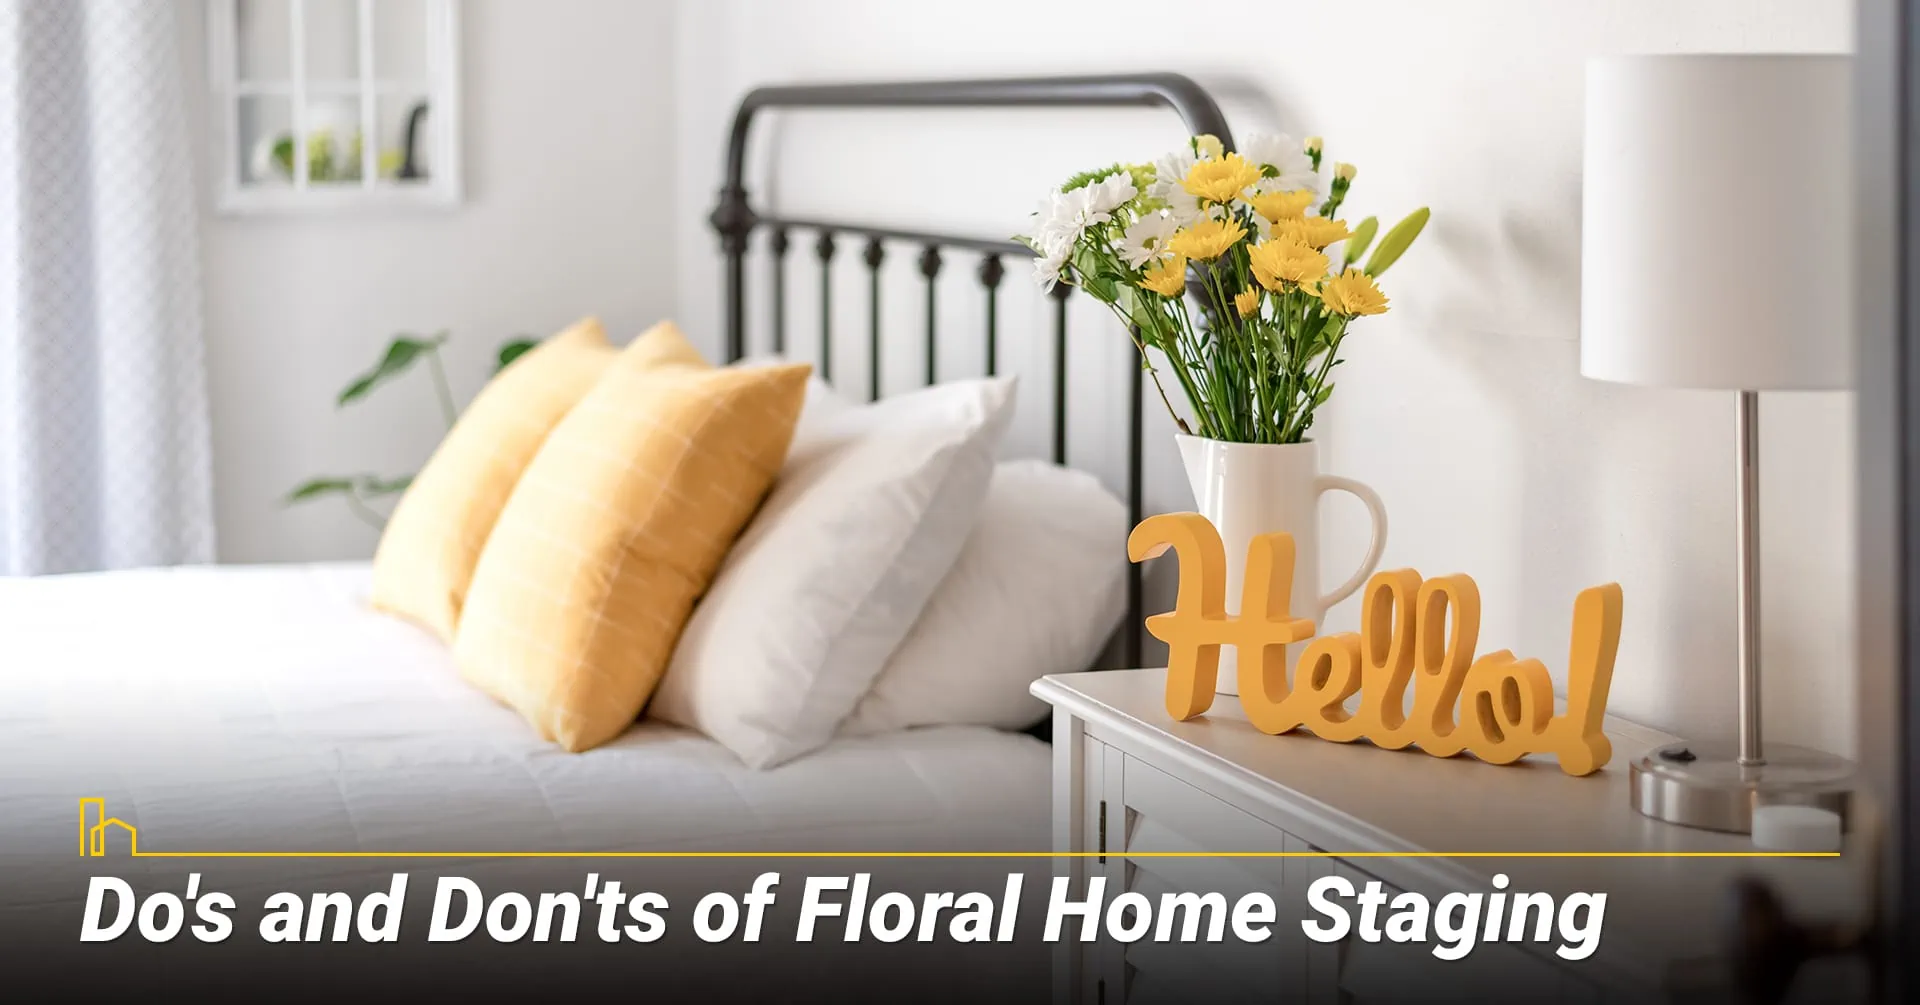 6. Do's and Don'ts of Floral Home Staging